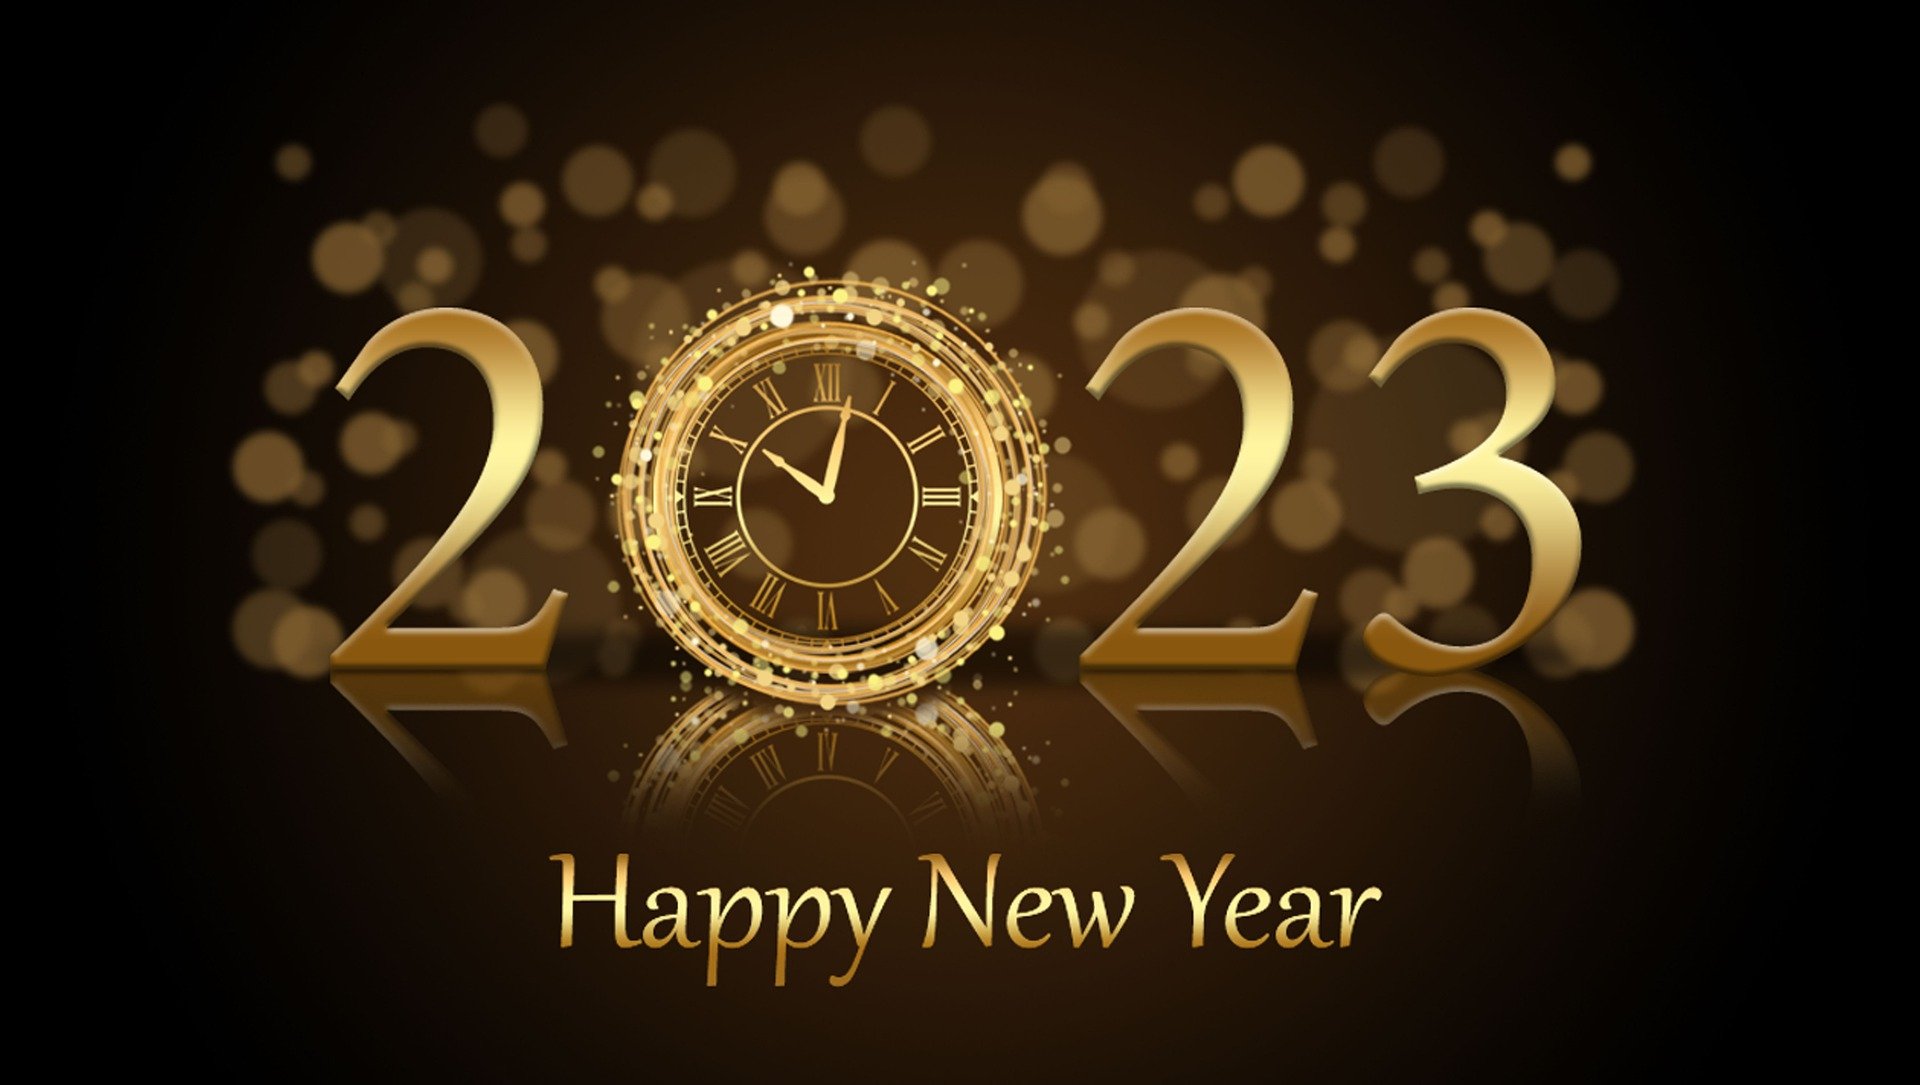 Wishing our Chamber Family a Happy New Year!